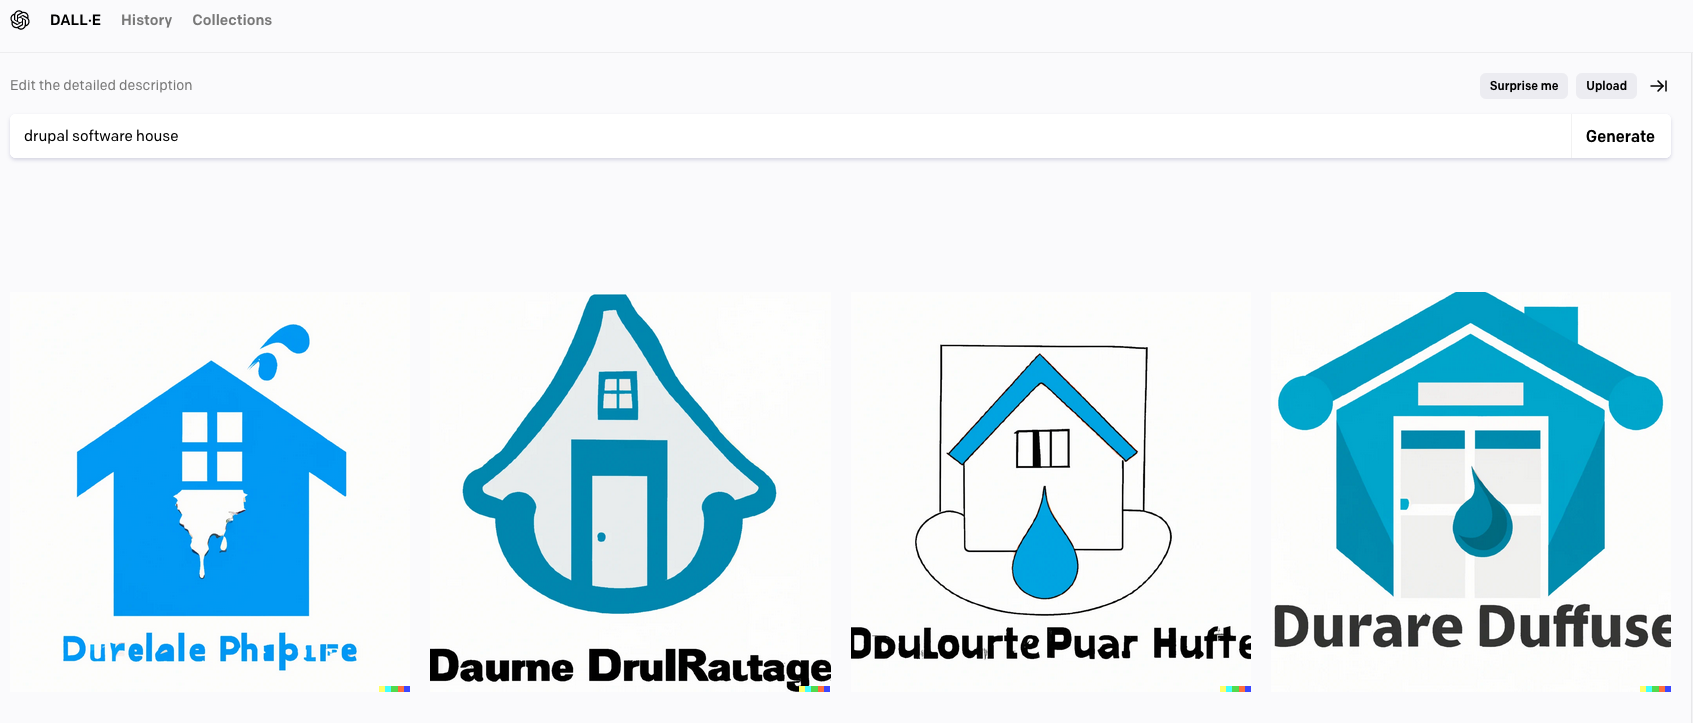 Examples of images generated by Dall-E 2 based on the keyword "drupal software house."